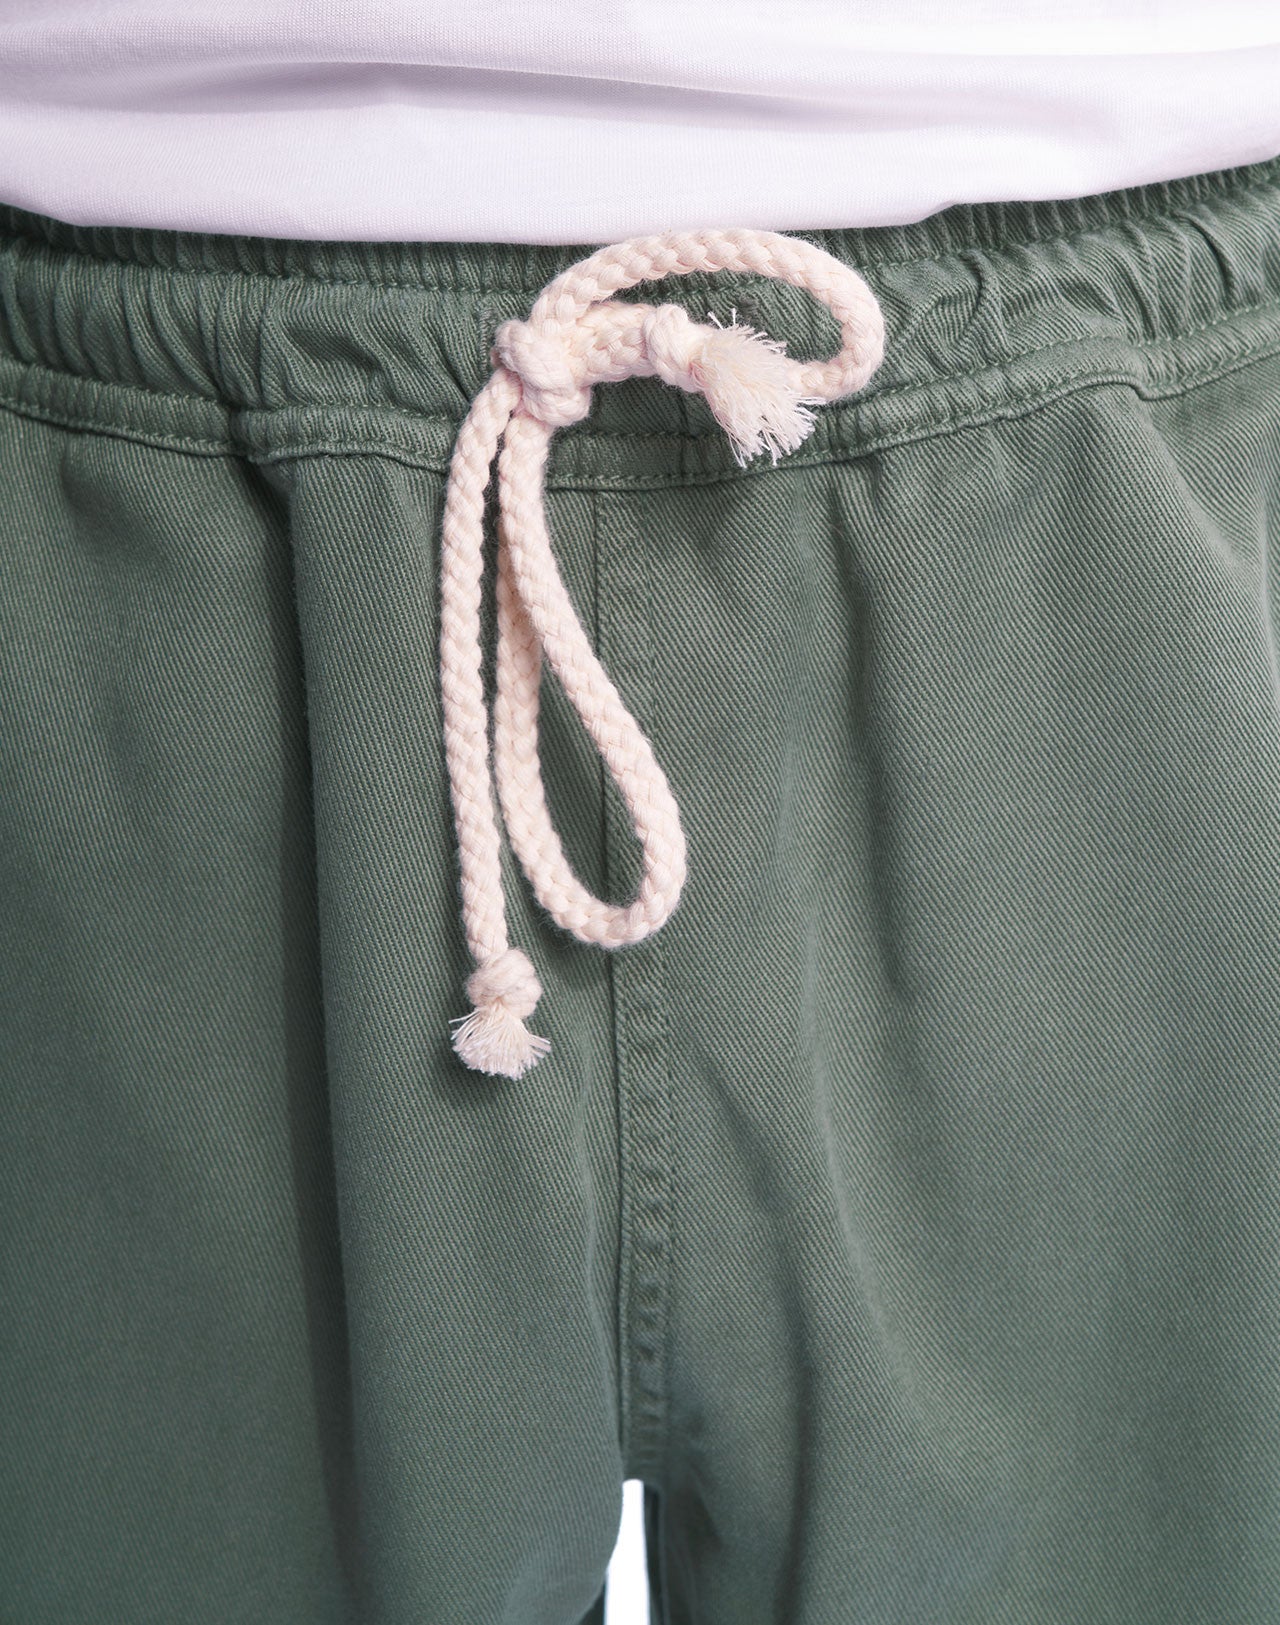 OLOW BODHI VERT SHORTS, OLIVE